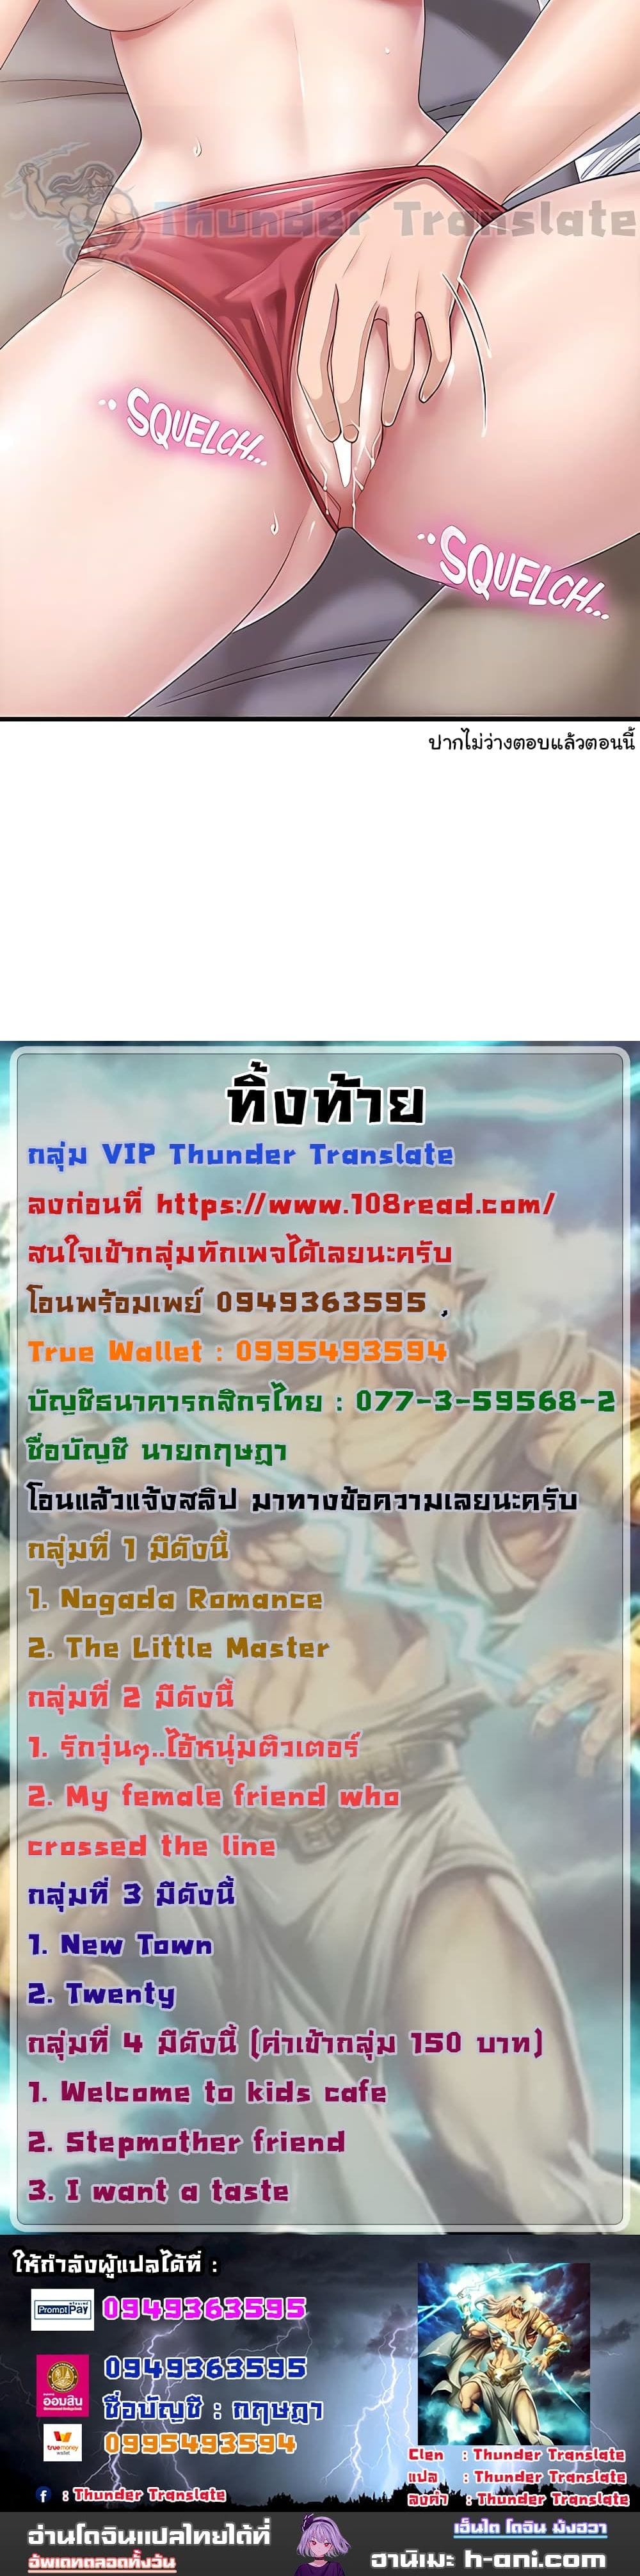 Welcome To Kids Cafe’ 45 ภาพ 10